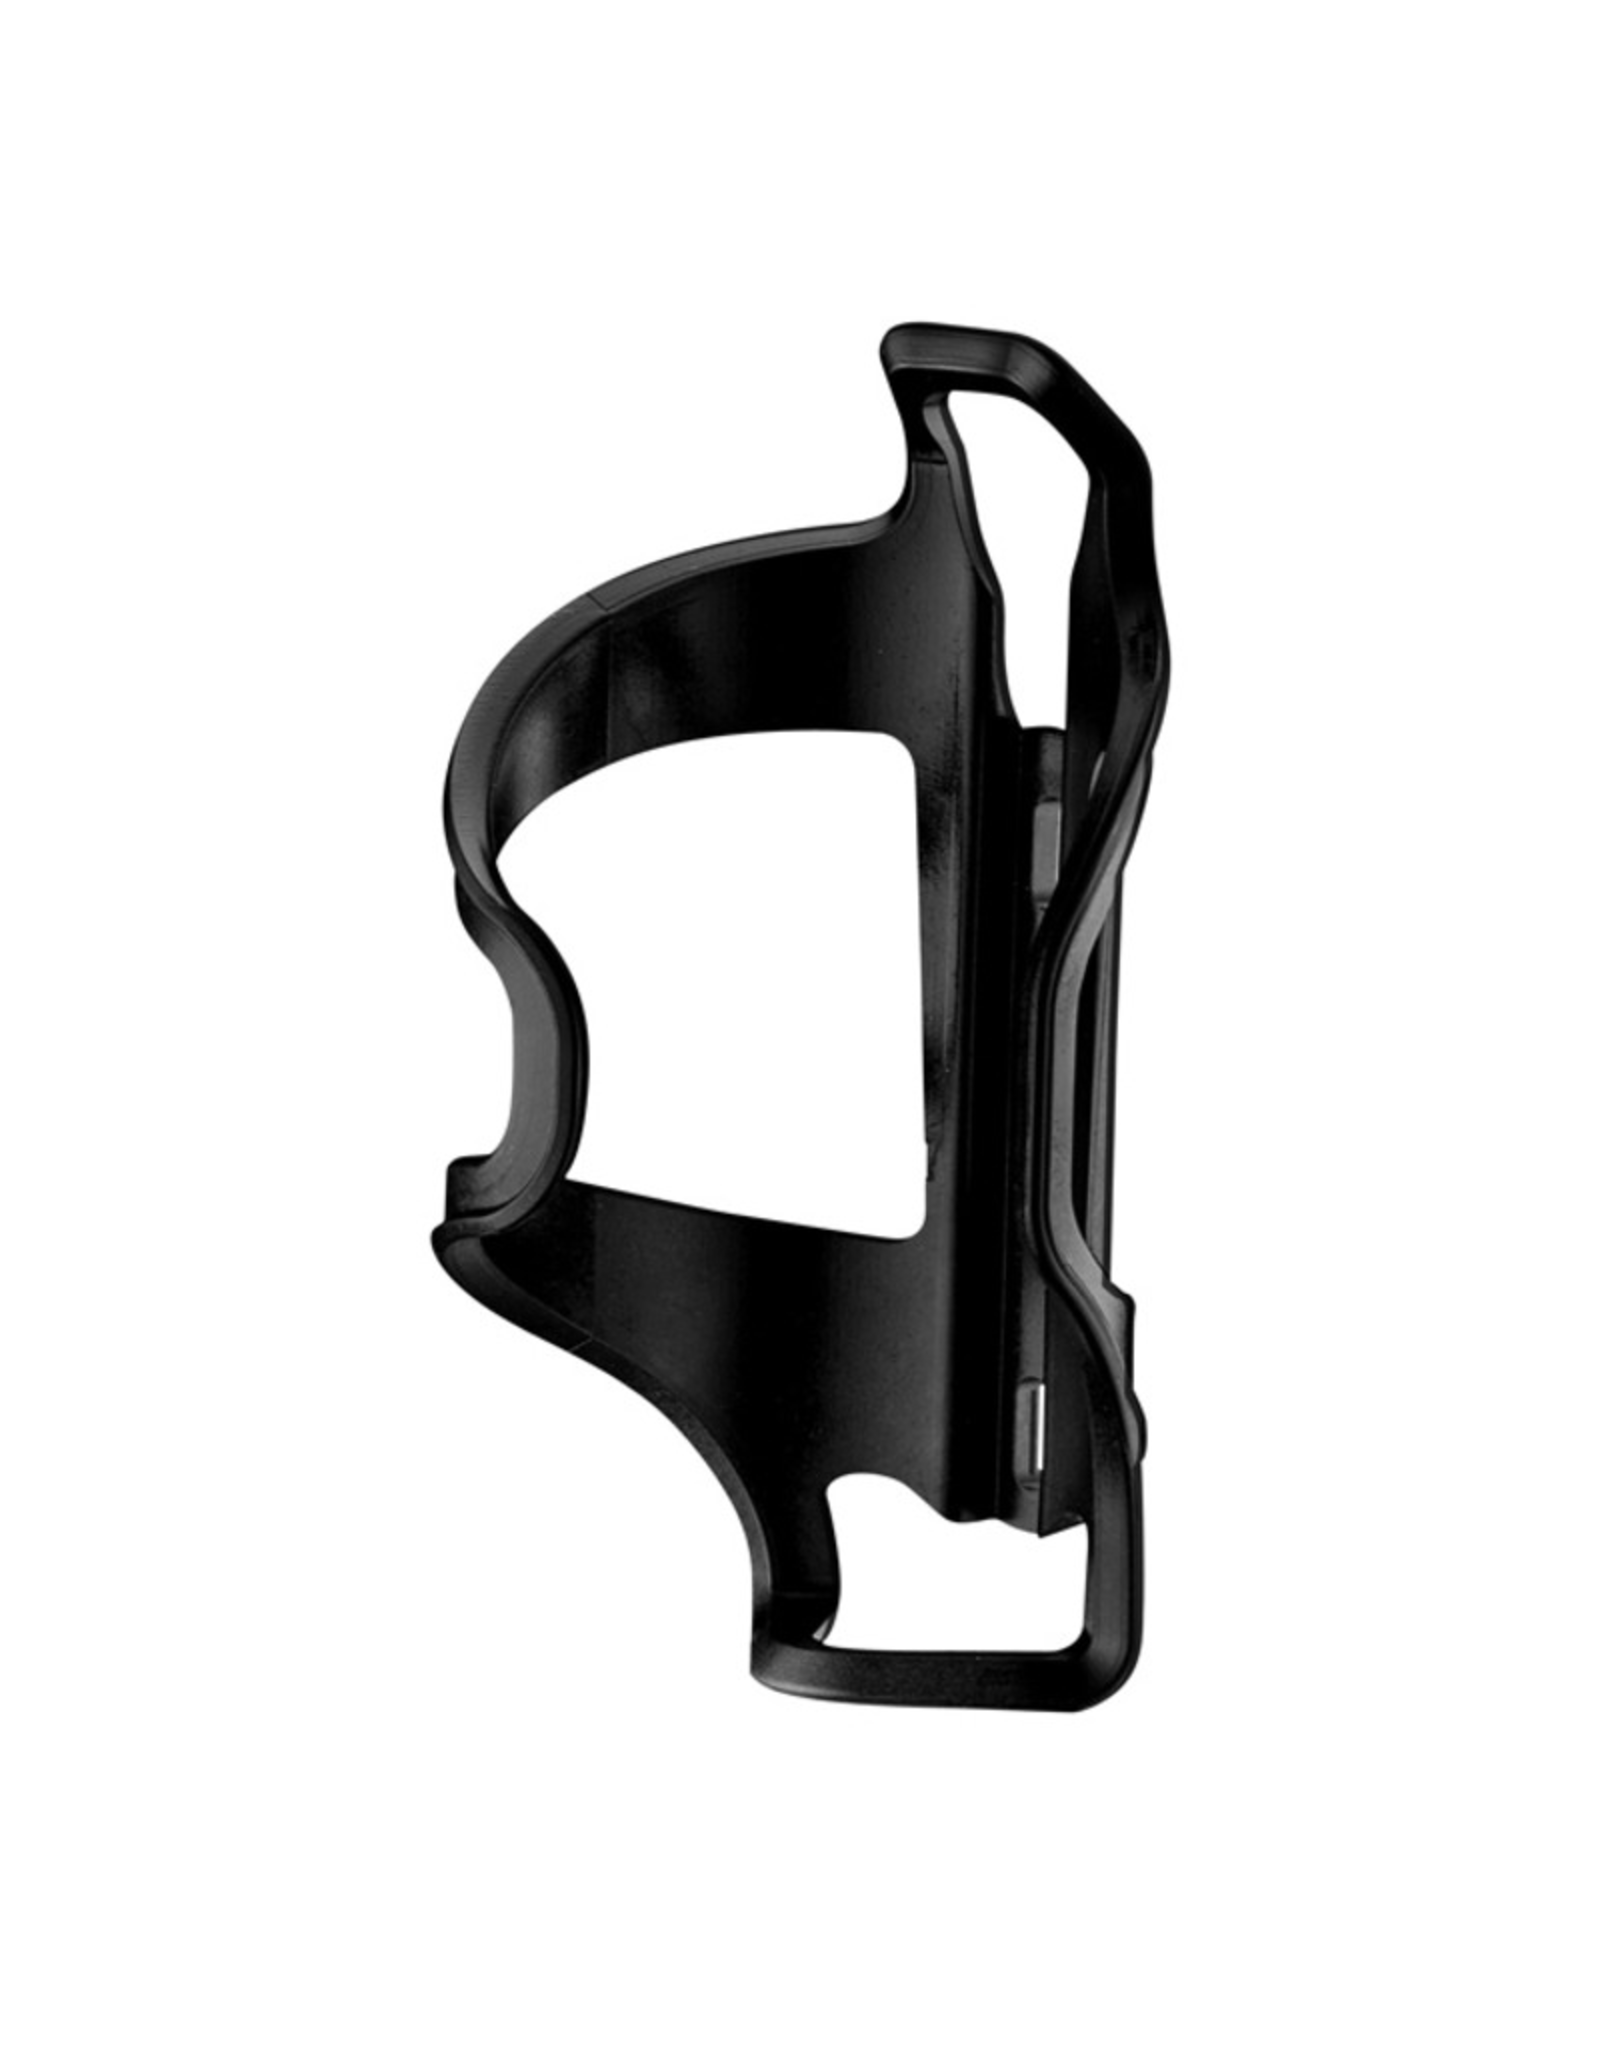 LEZYNE LEZYNE FLOW SL (SIDE LOAD) RIGHT HAND BOTTLE CAGE